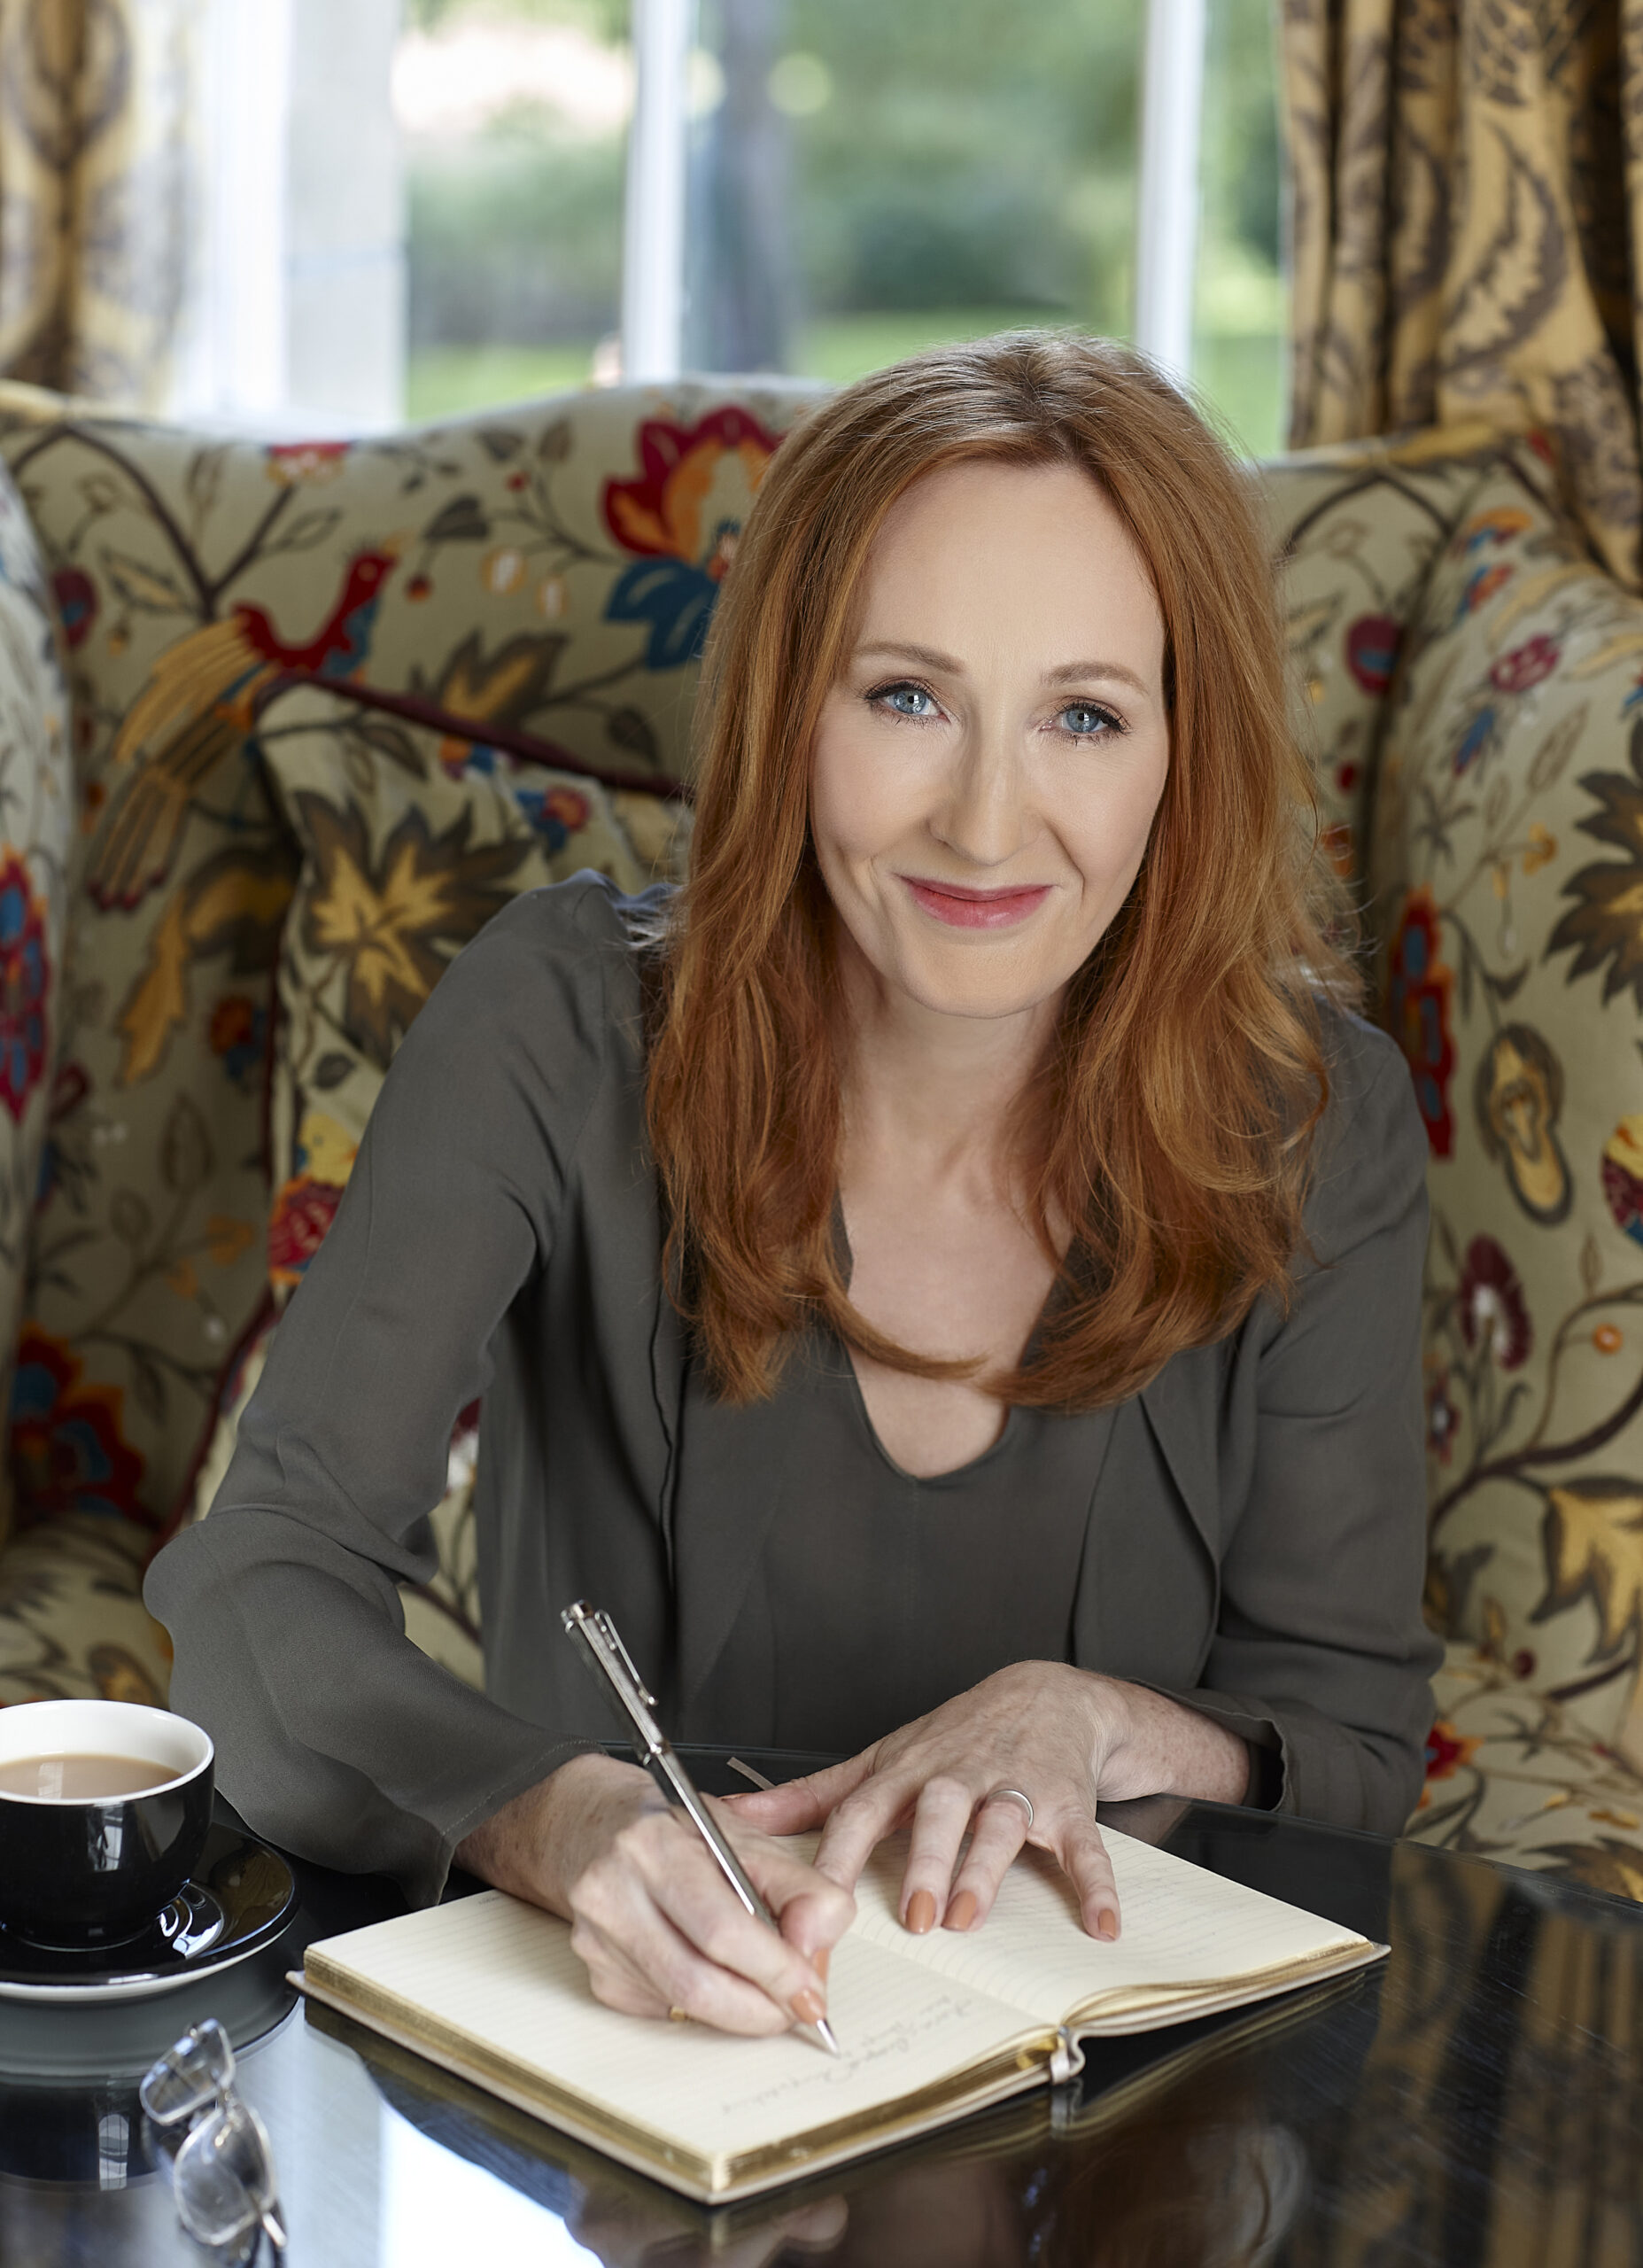 Harry Potter 19 Years Later  JK Rowling celebrates return to